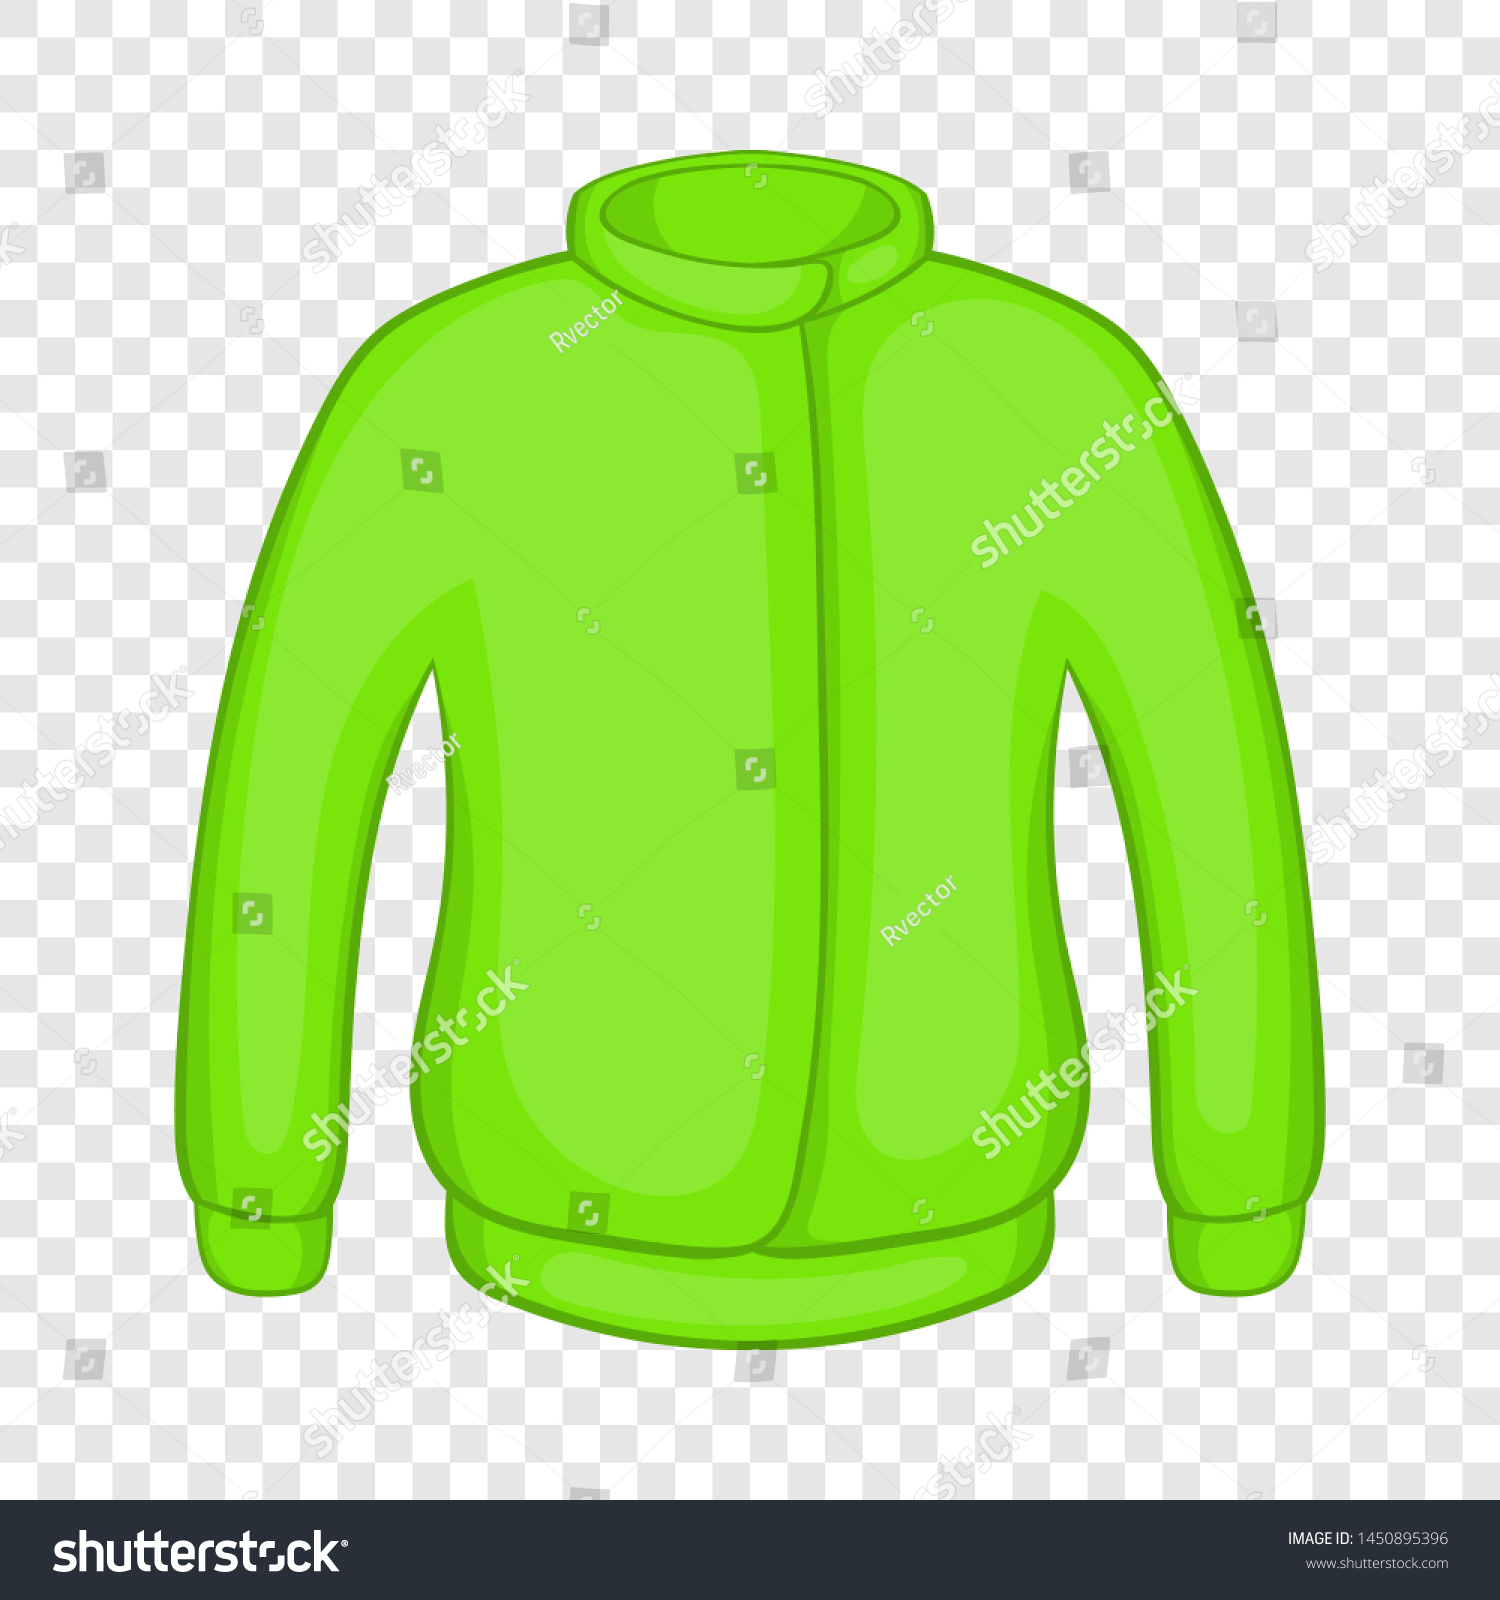 Green paintball jacket icon in cartoon style on a background for any web design #1450895396